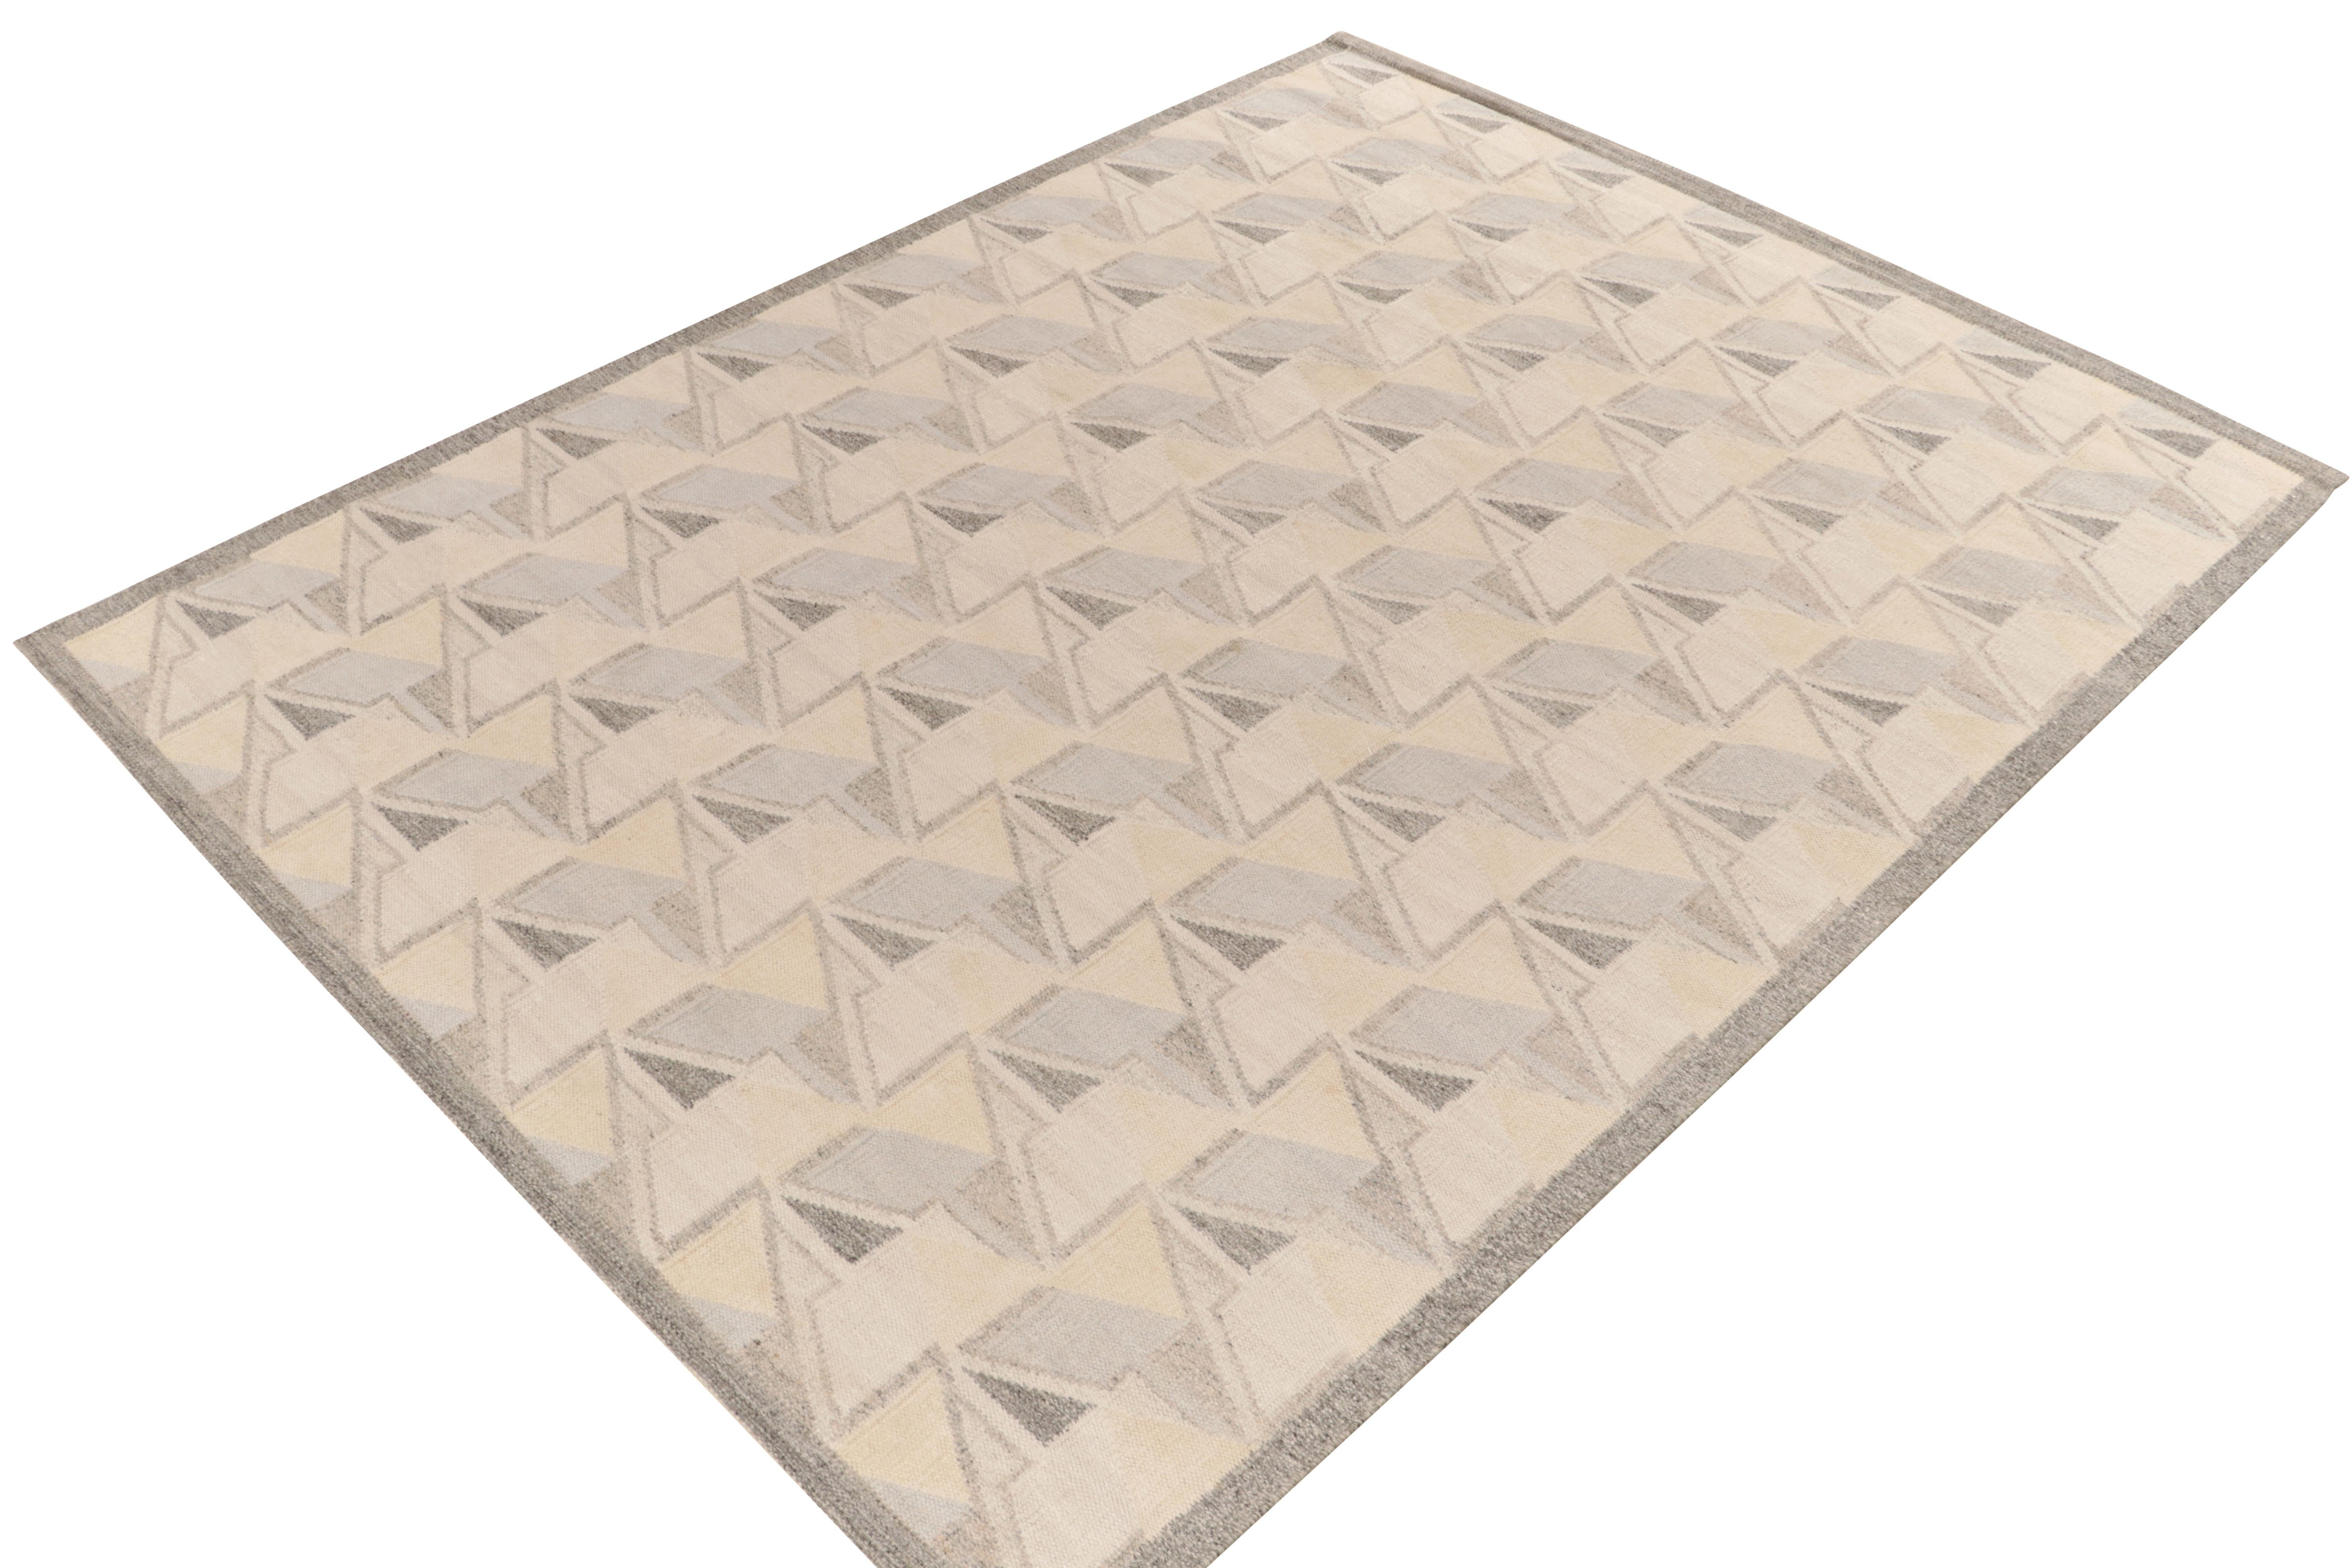 Rug & Kilim’s Scandinavian style kilim from our celebrated flatweave collection. This 9x12 rug enjoys the finesse of Swedish aesthetics with a dextrous geometric pattern casting a 3D impression. The colorway in undyed natural yarns enjoys forgiving